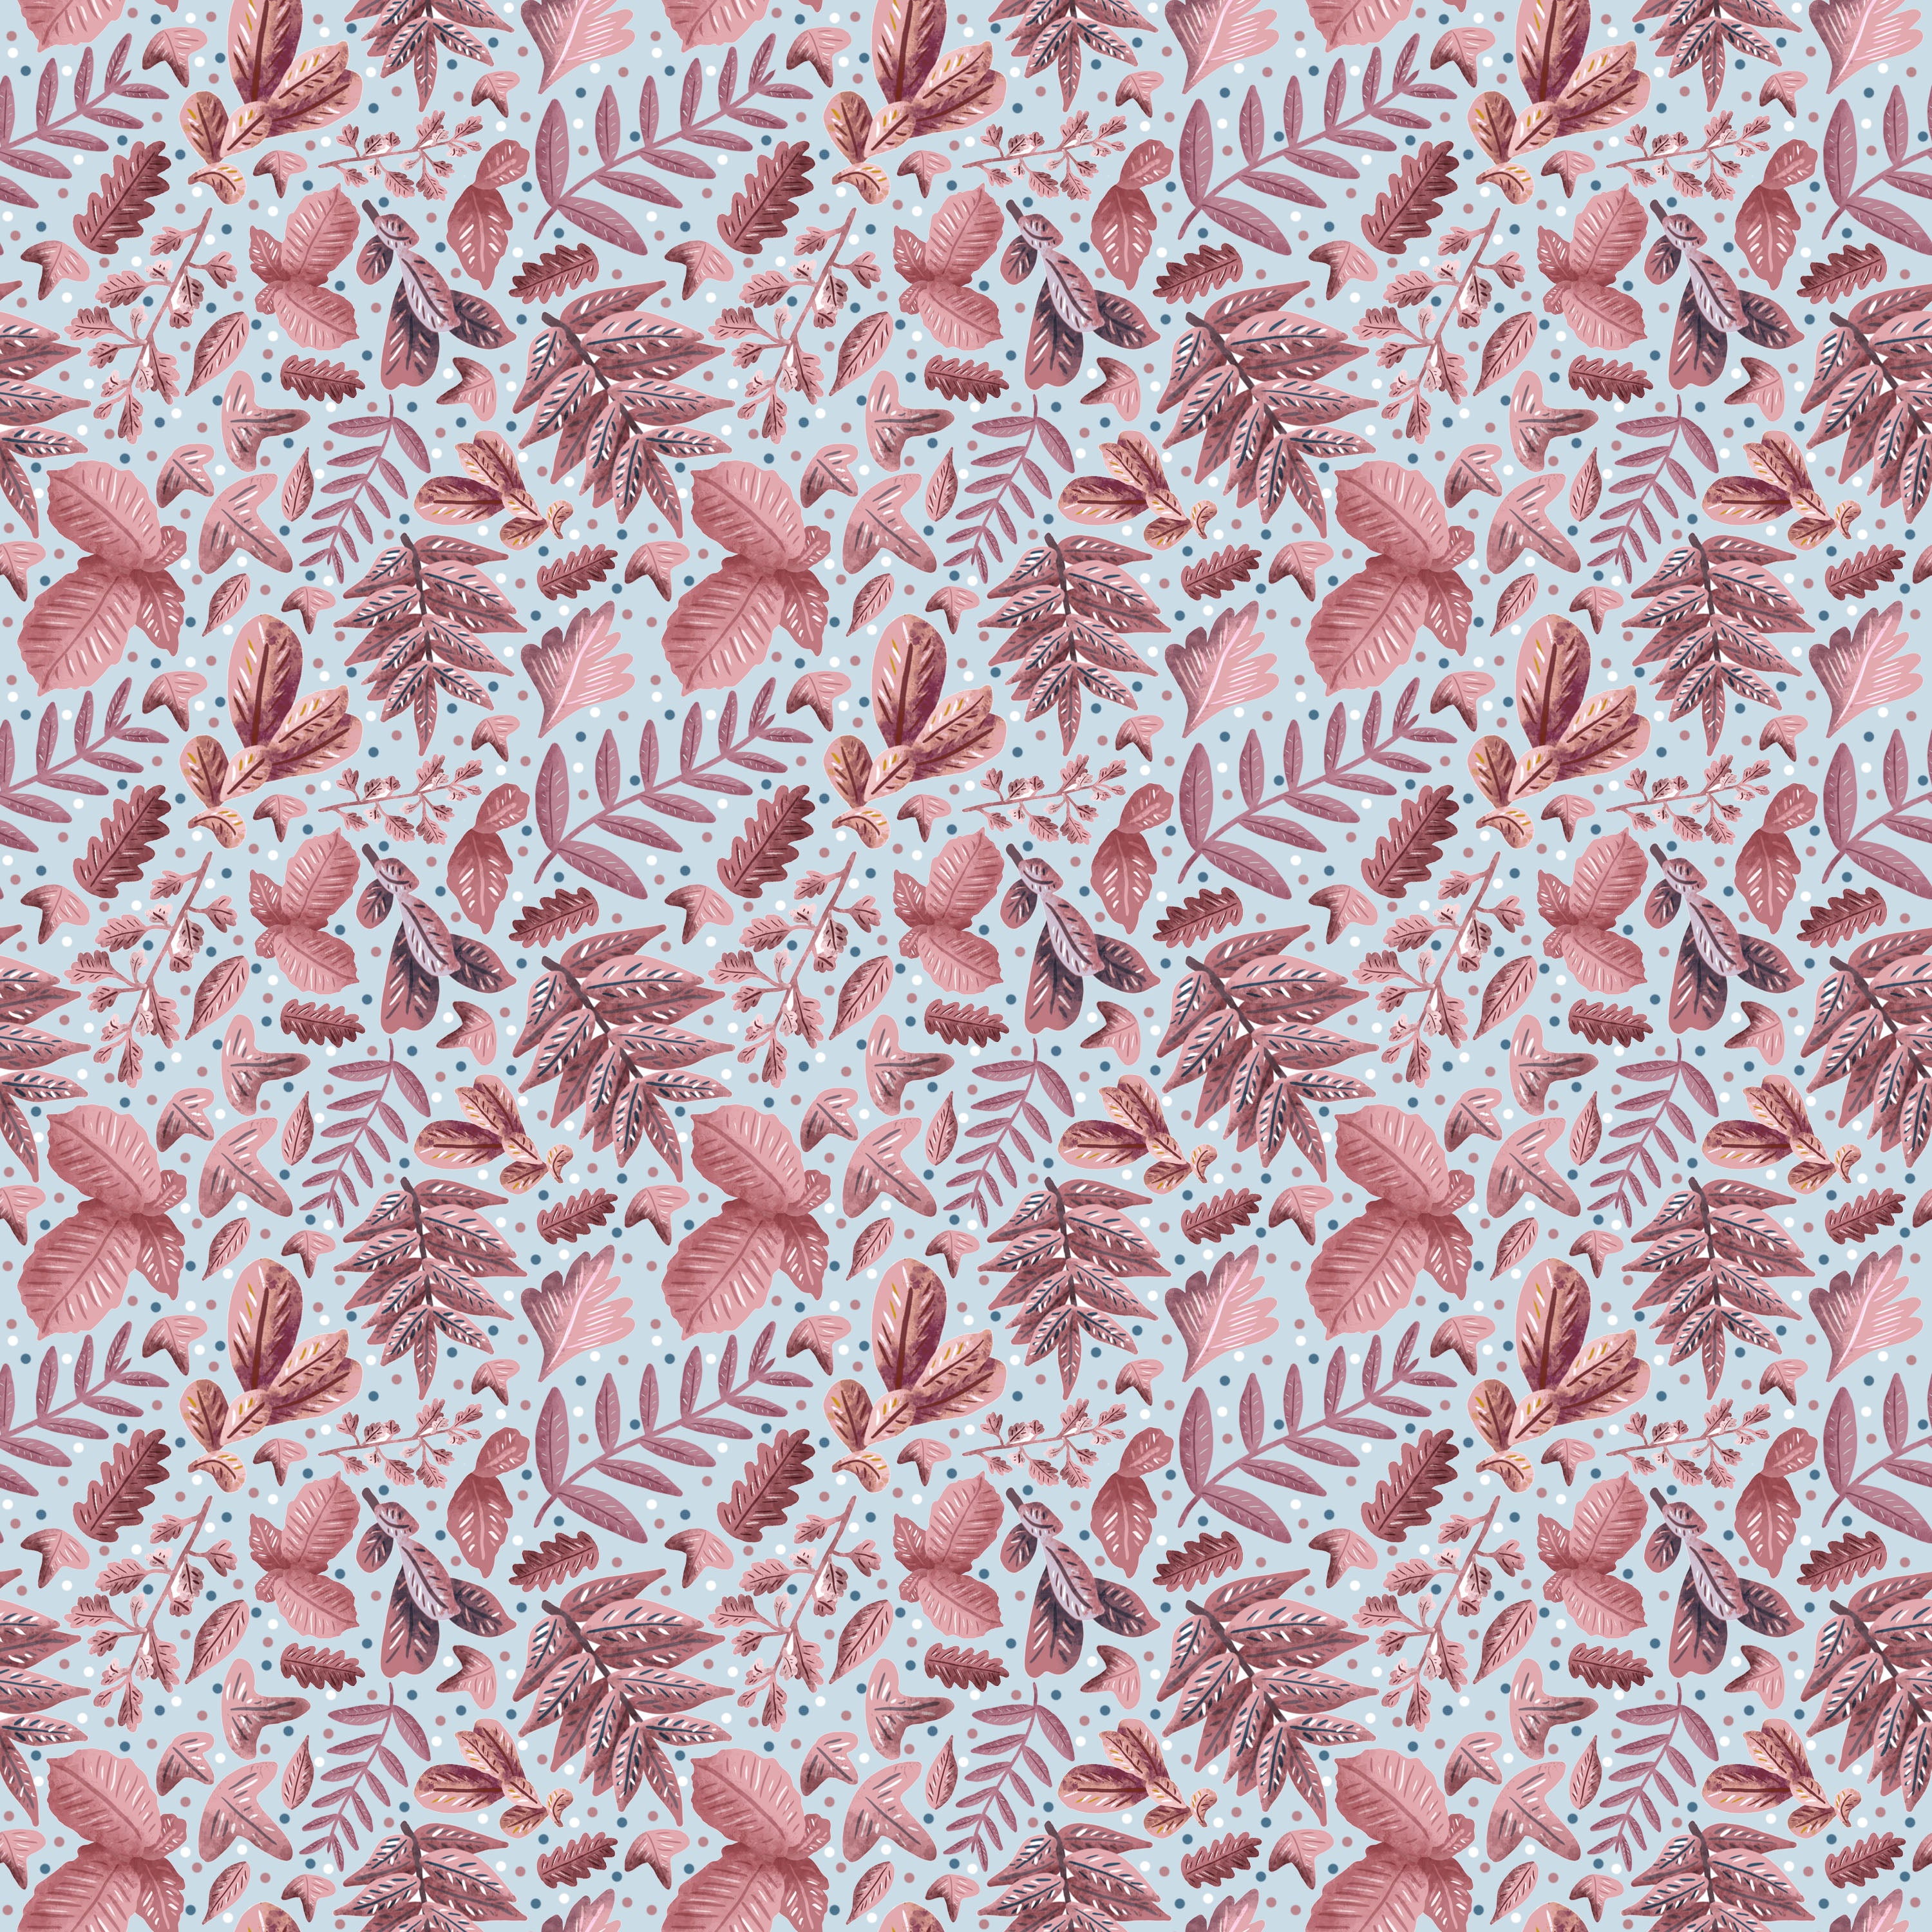 pink and blue leafy surface pattern design